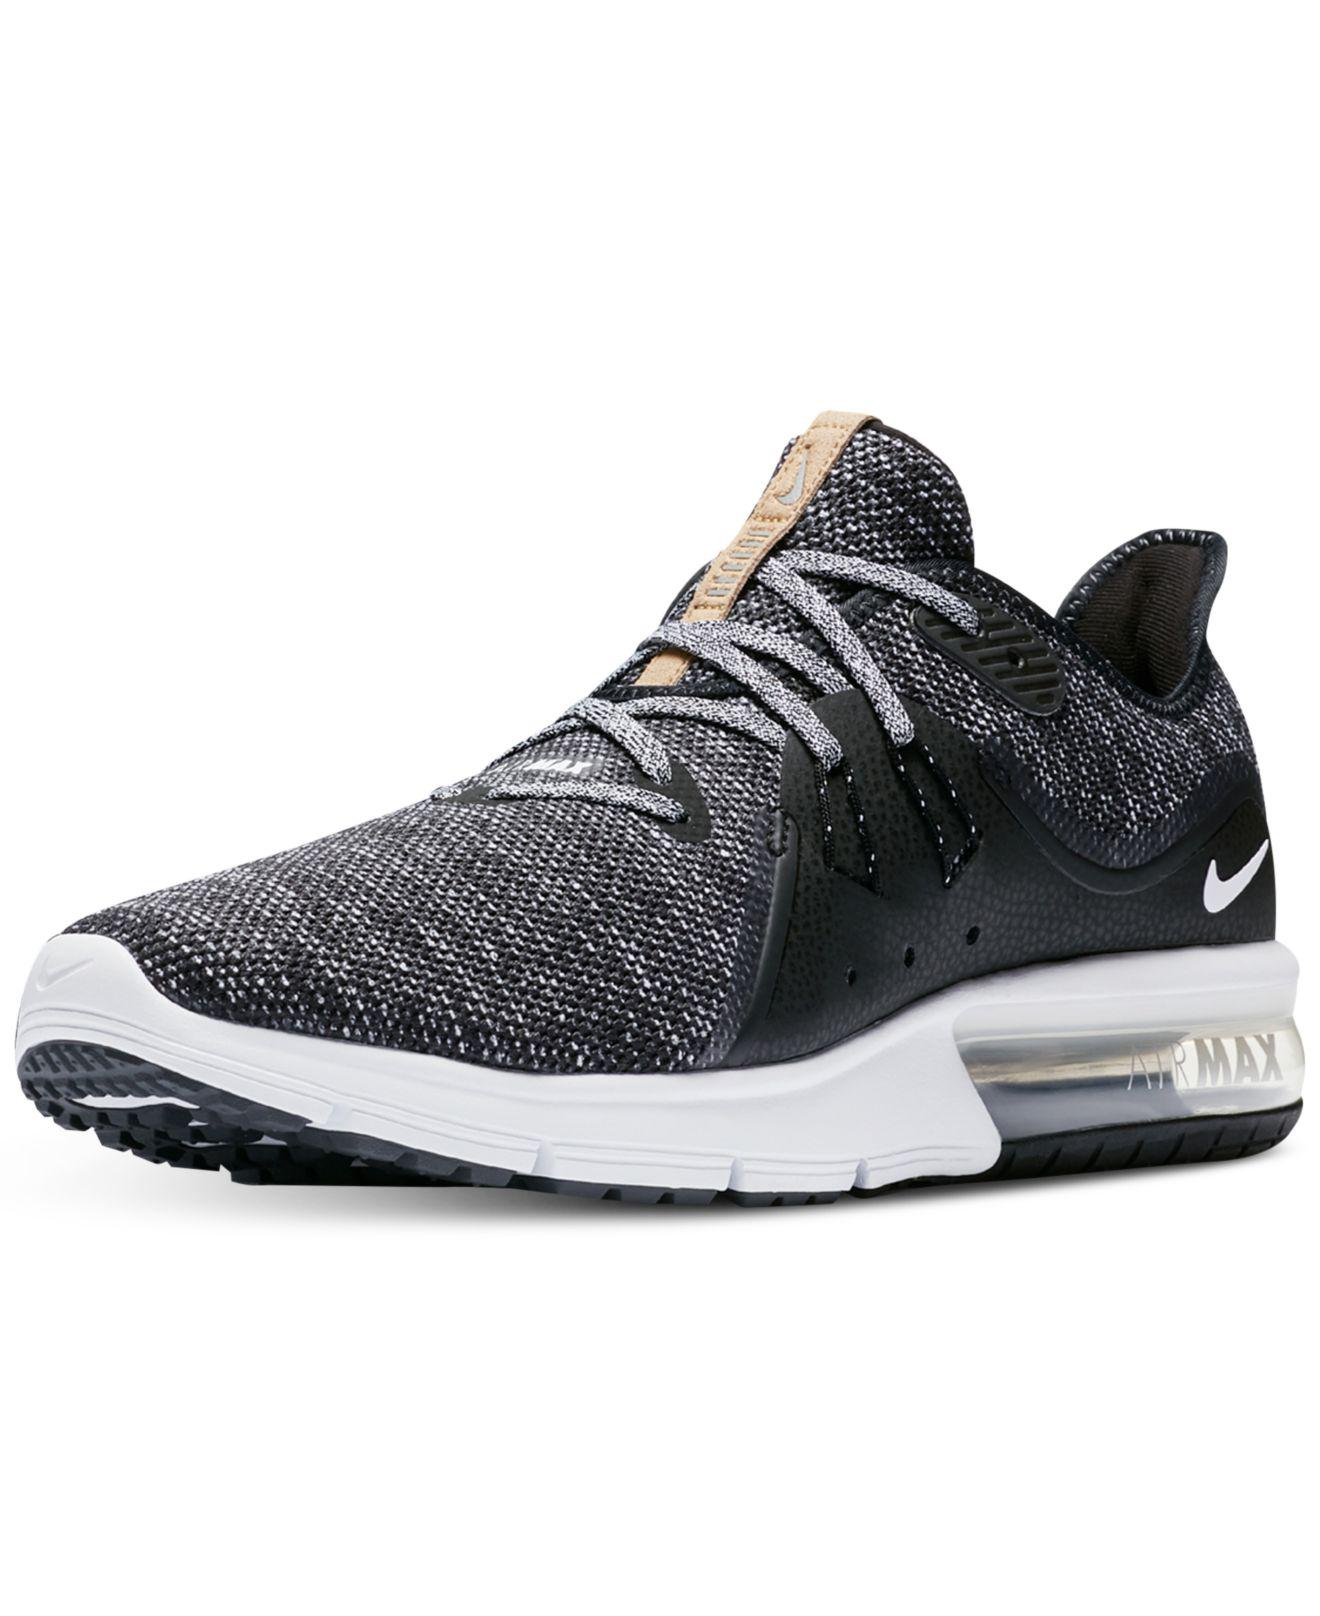 nike men's air max sequent 3 running shoes